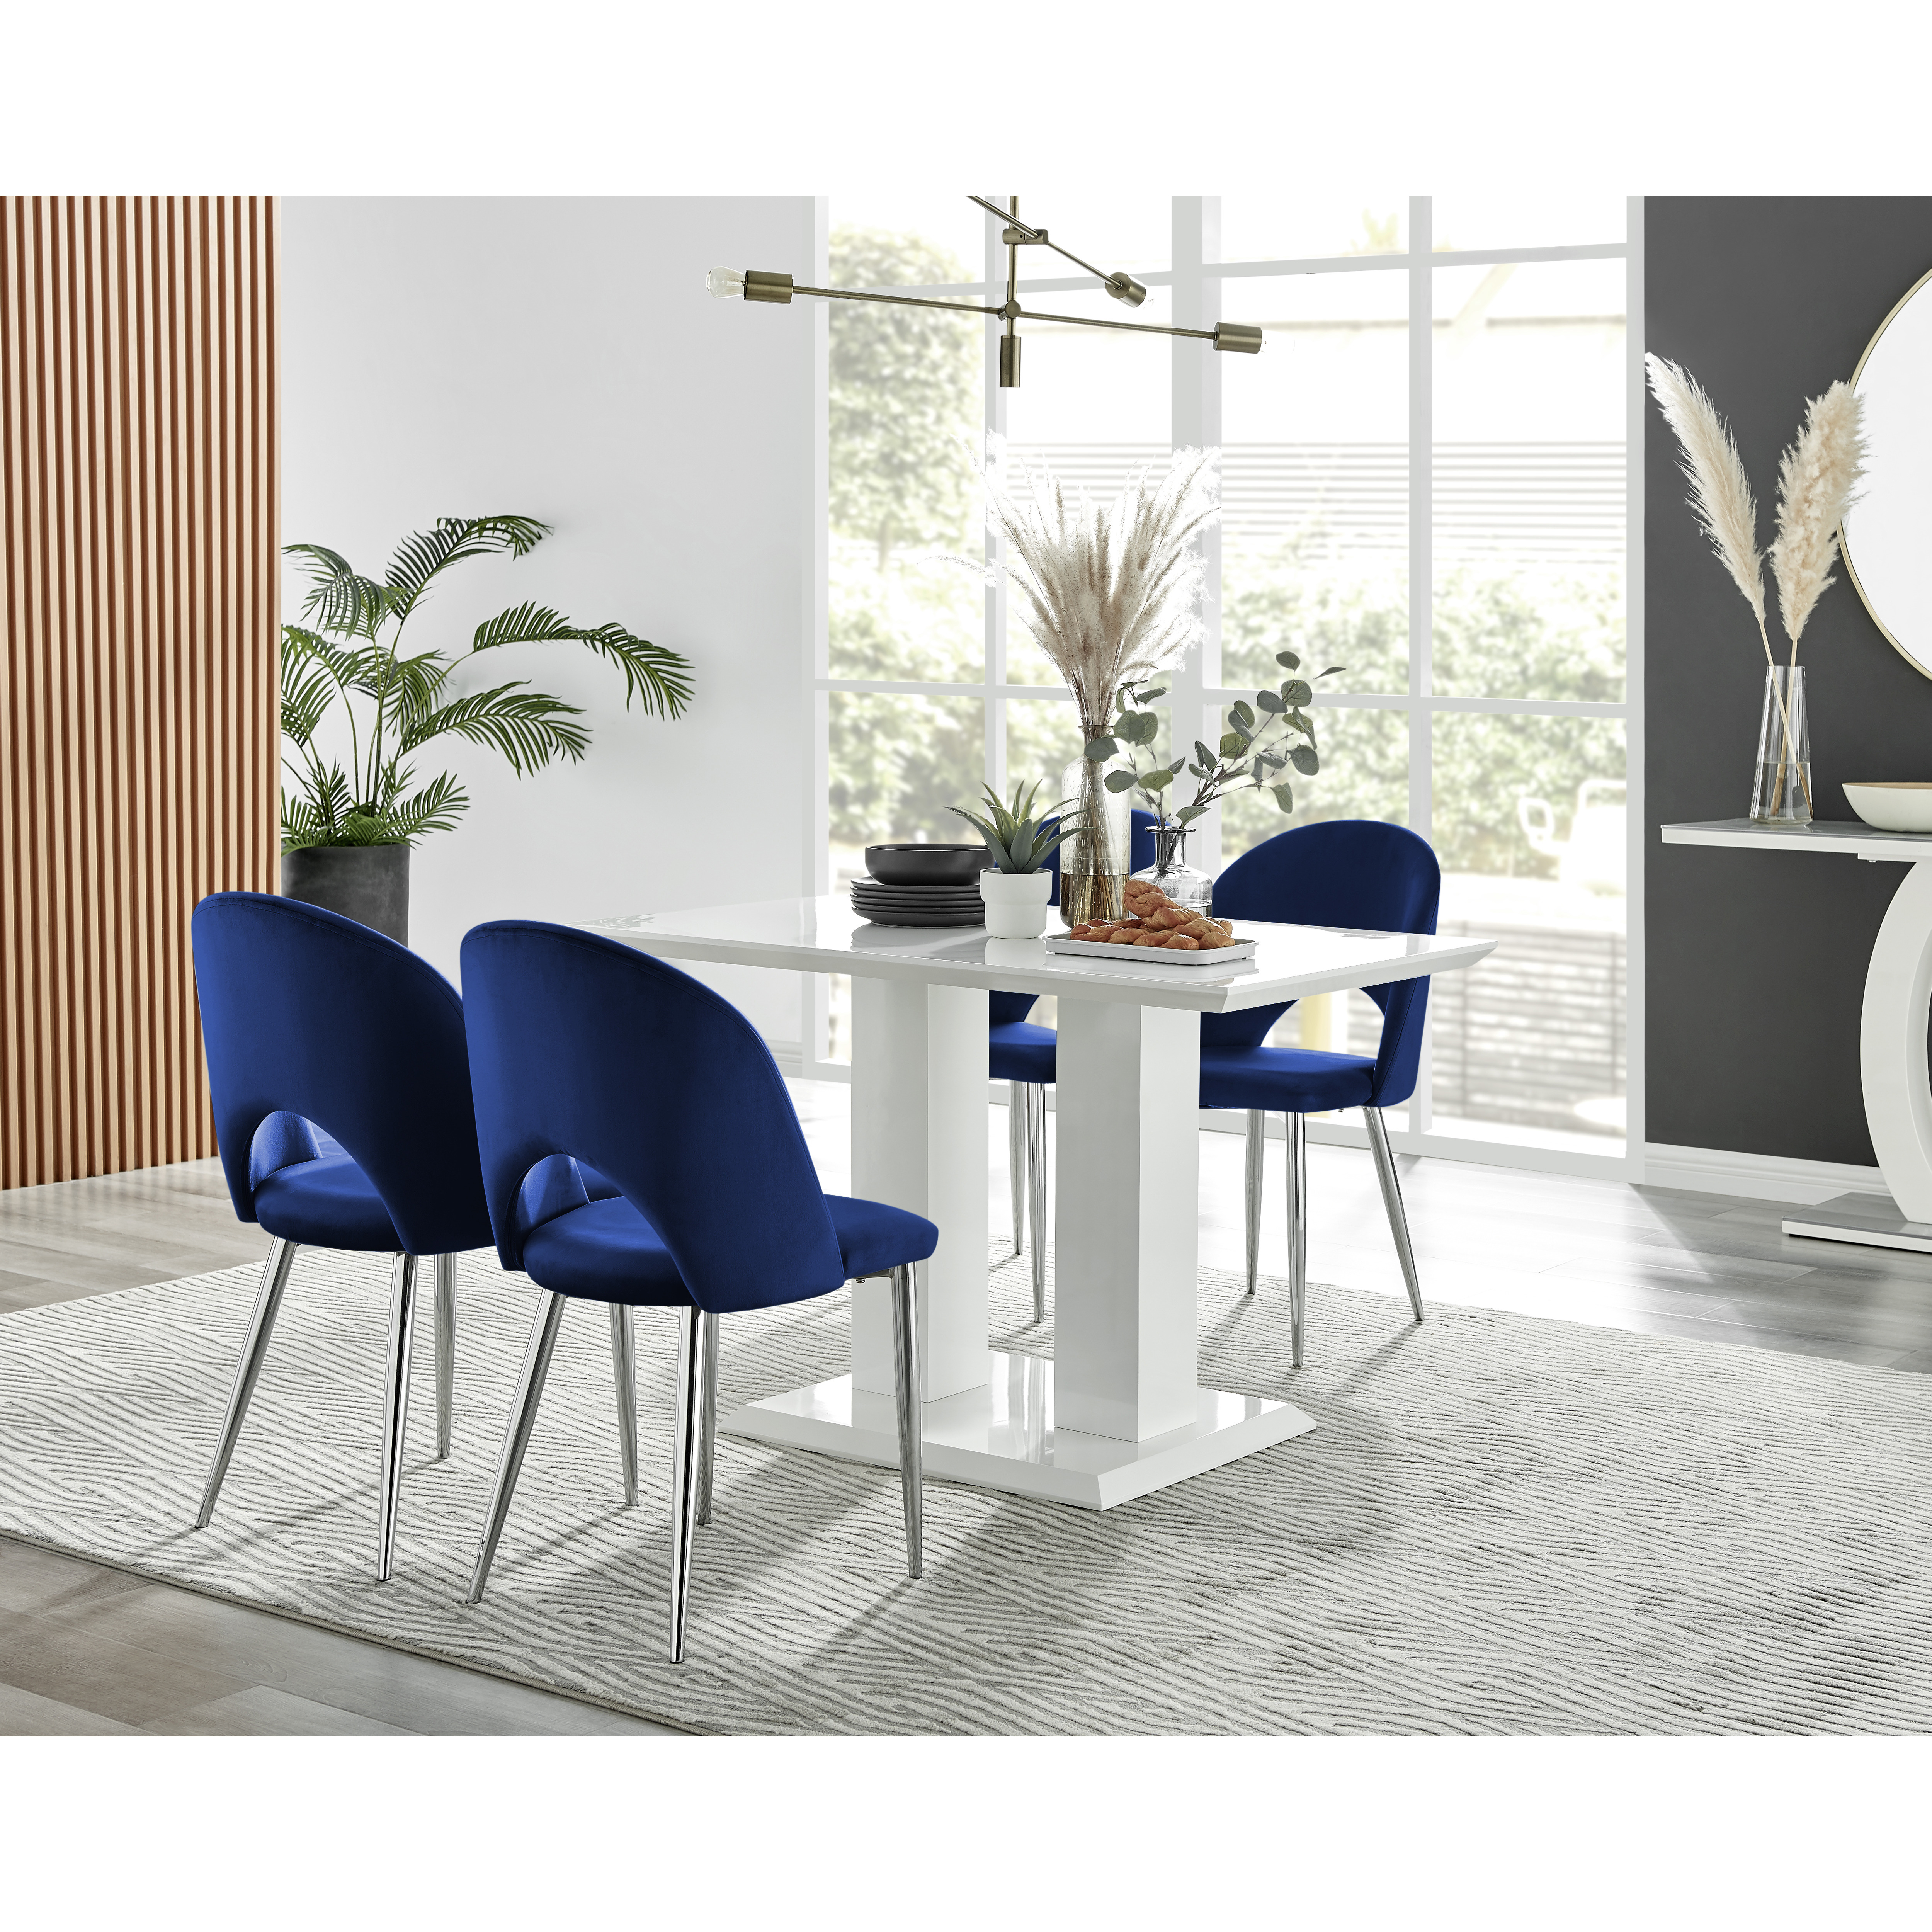 Imperia 4 White Dining Table and 4 Arlon Silver Leg Chairs